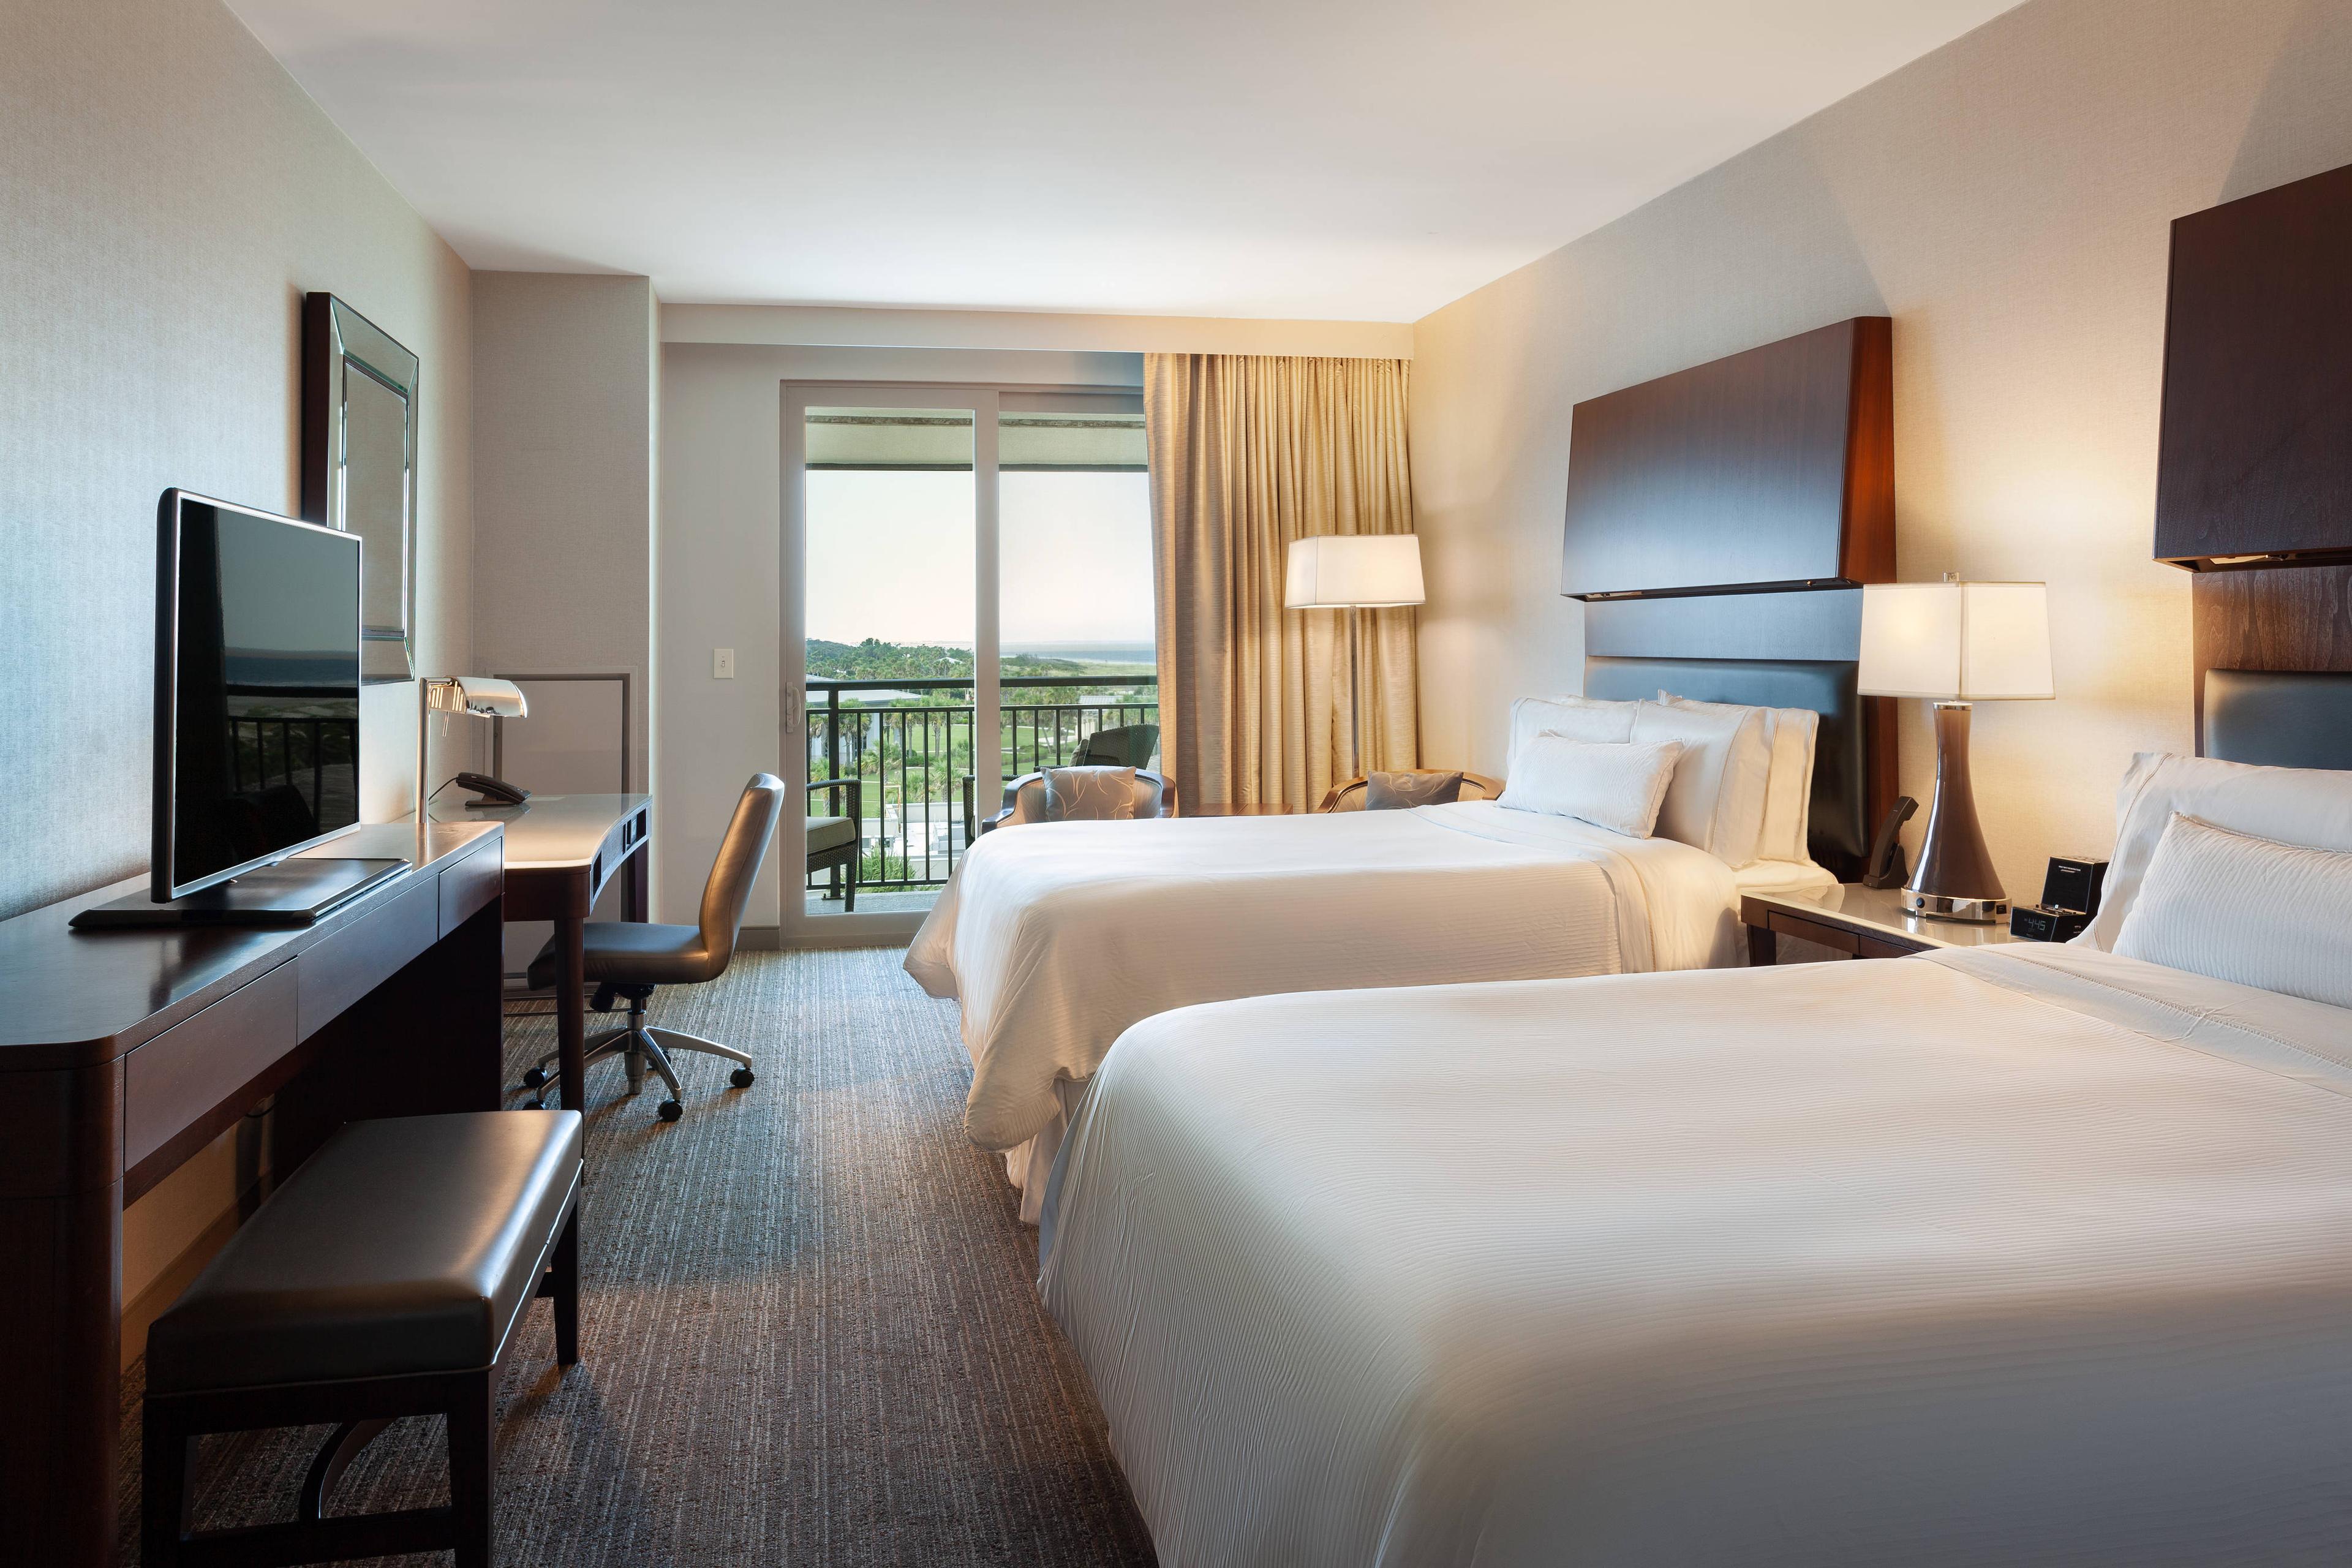 Each of our ocean-view rooms features a step-out balcony overlooking either Beach Village or the hotel courtyard, as well as an iconic Heavenly® Bed.